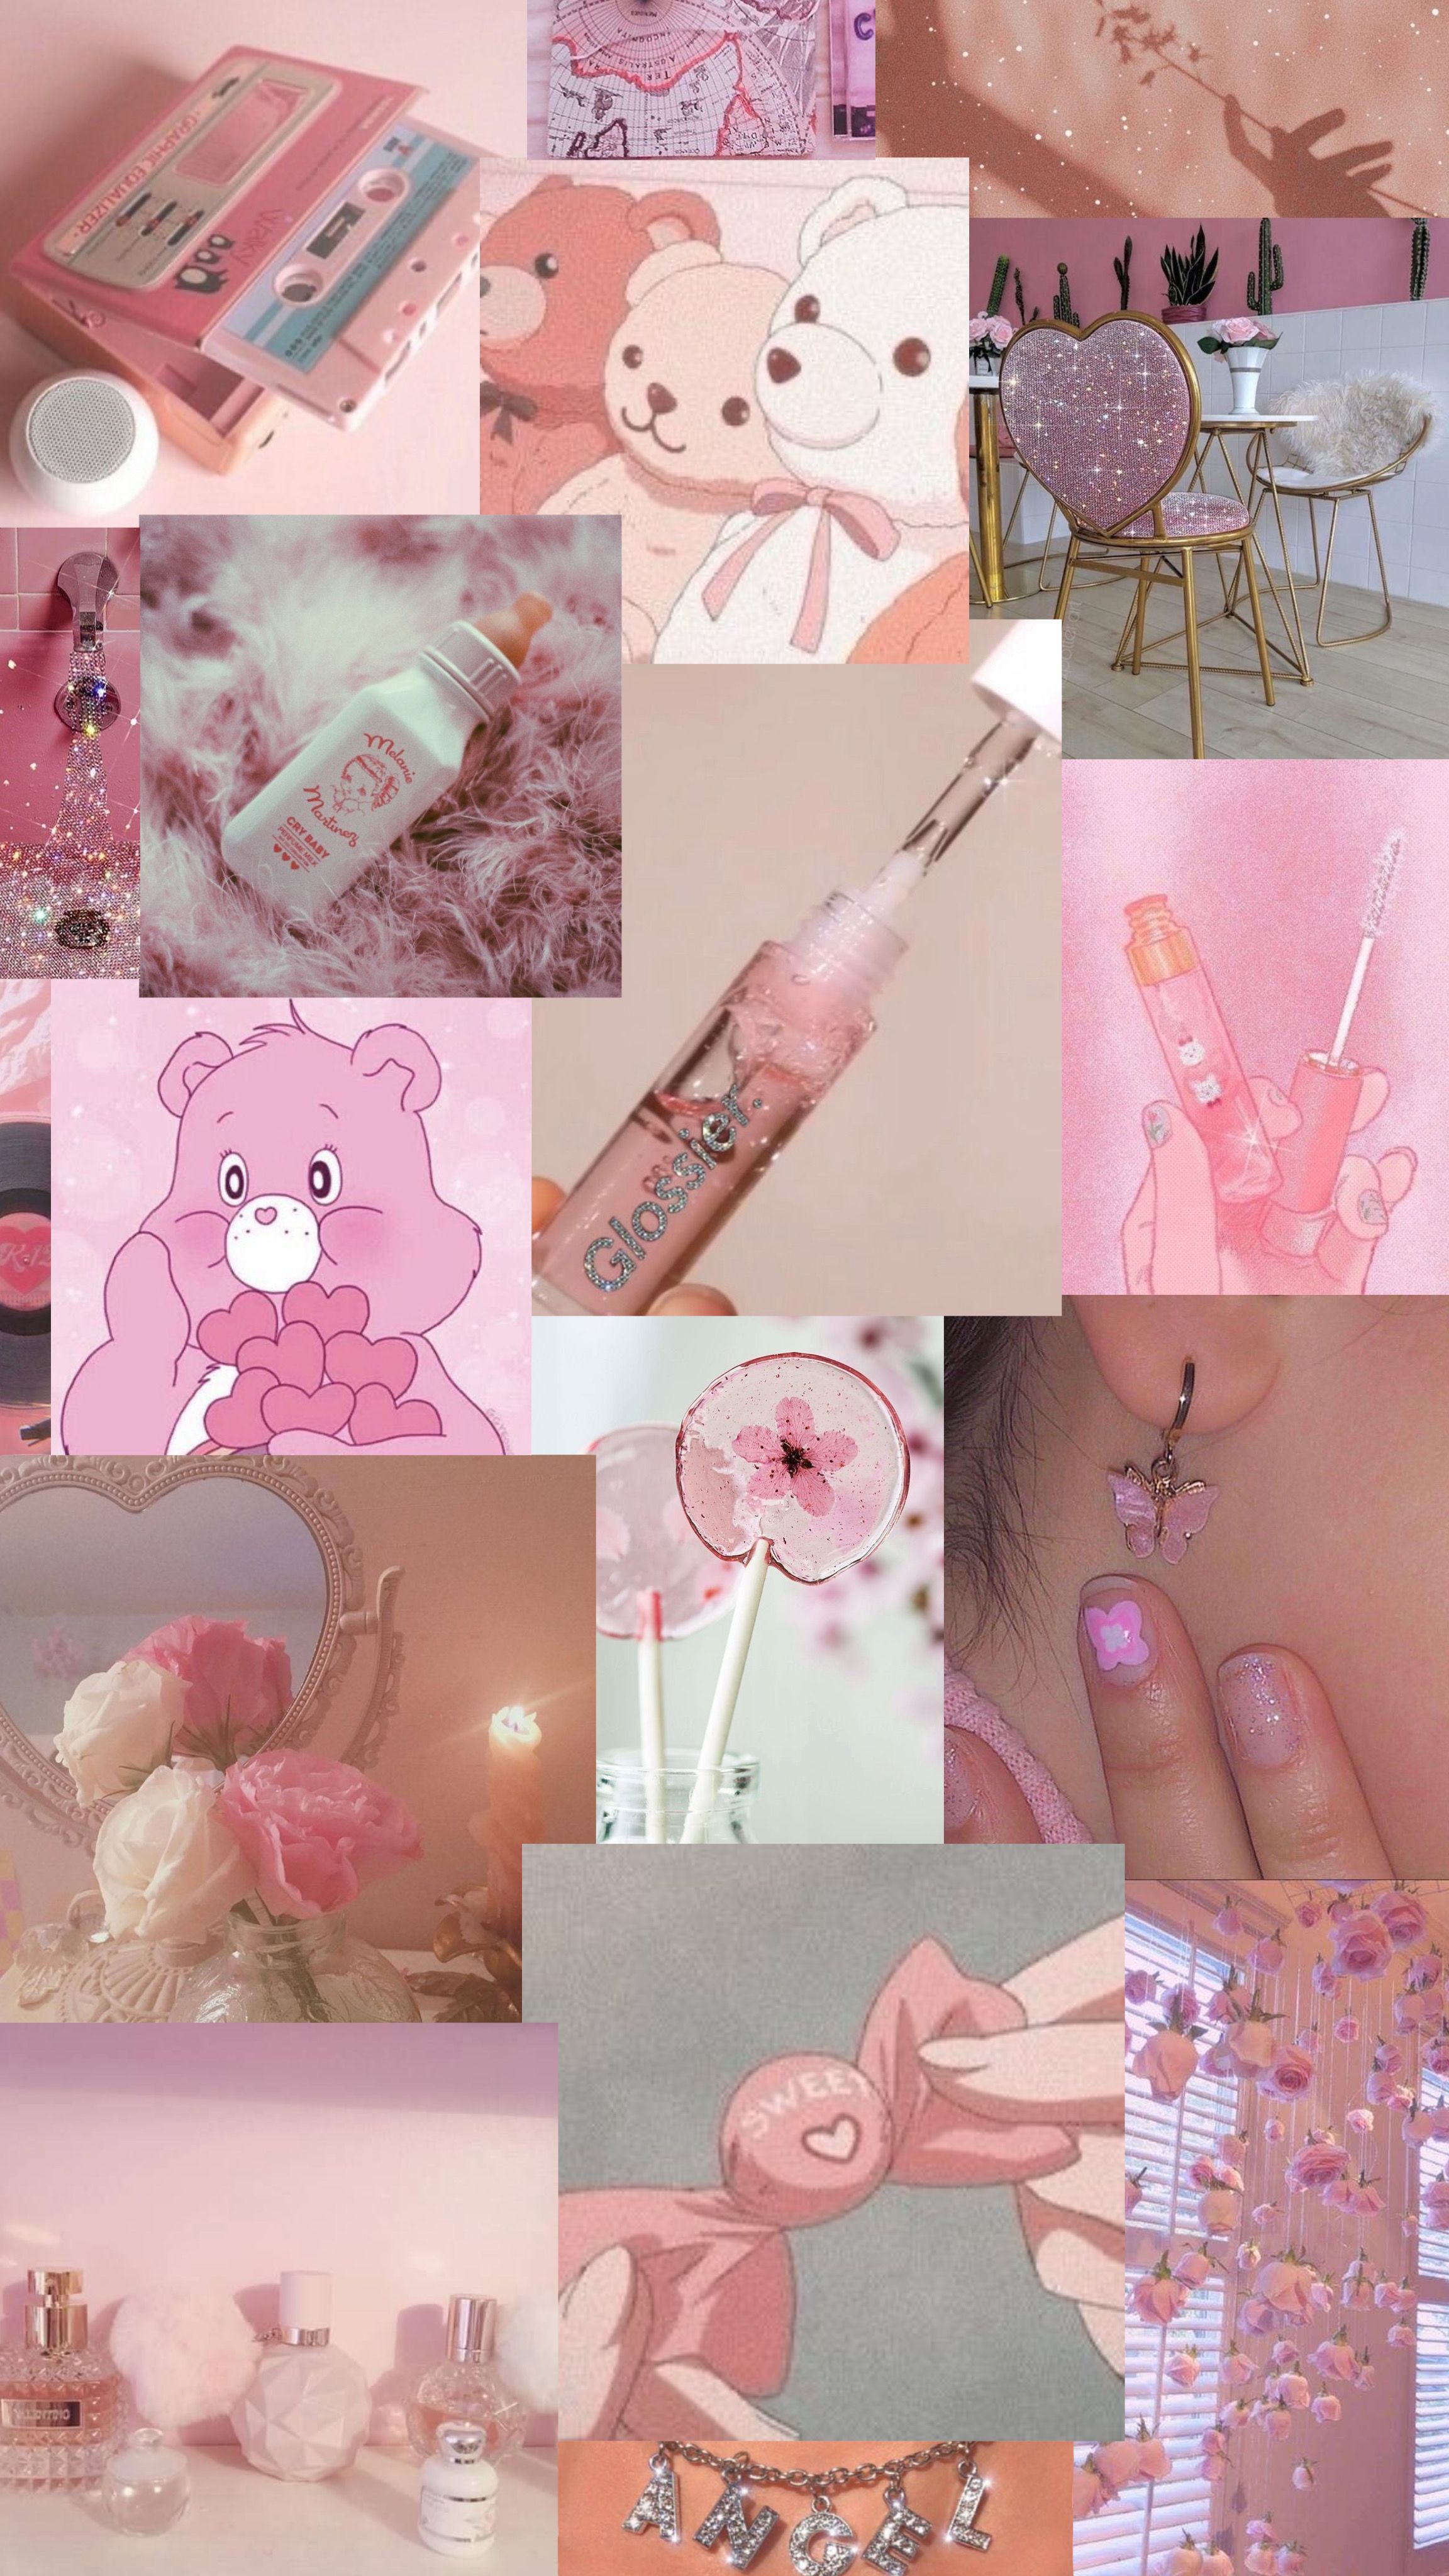 pink collage wallpaper. Pink wallpaper, Hello kitty wallpaper, Aesthetic themes